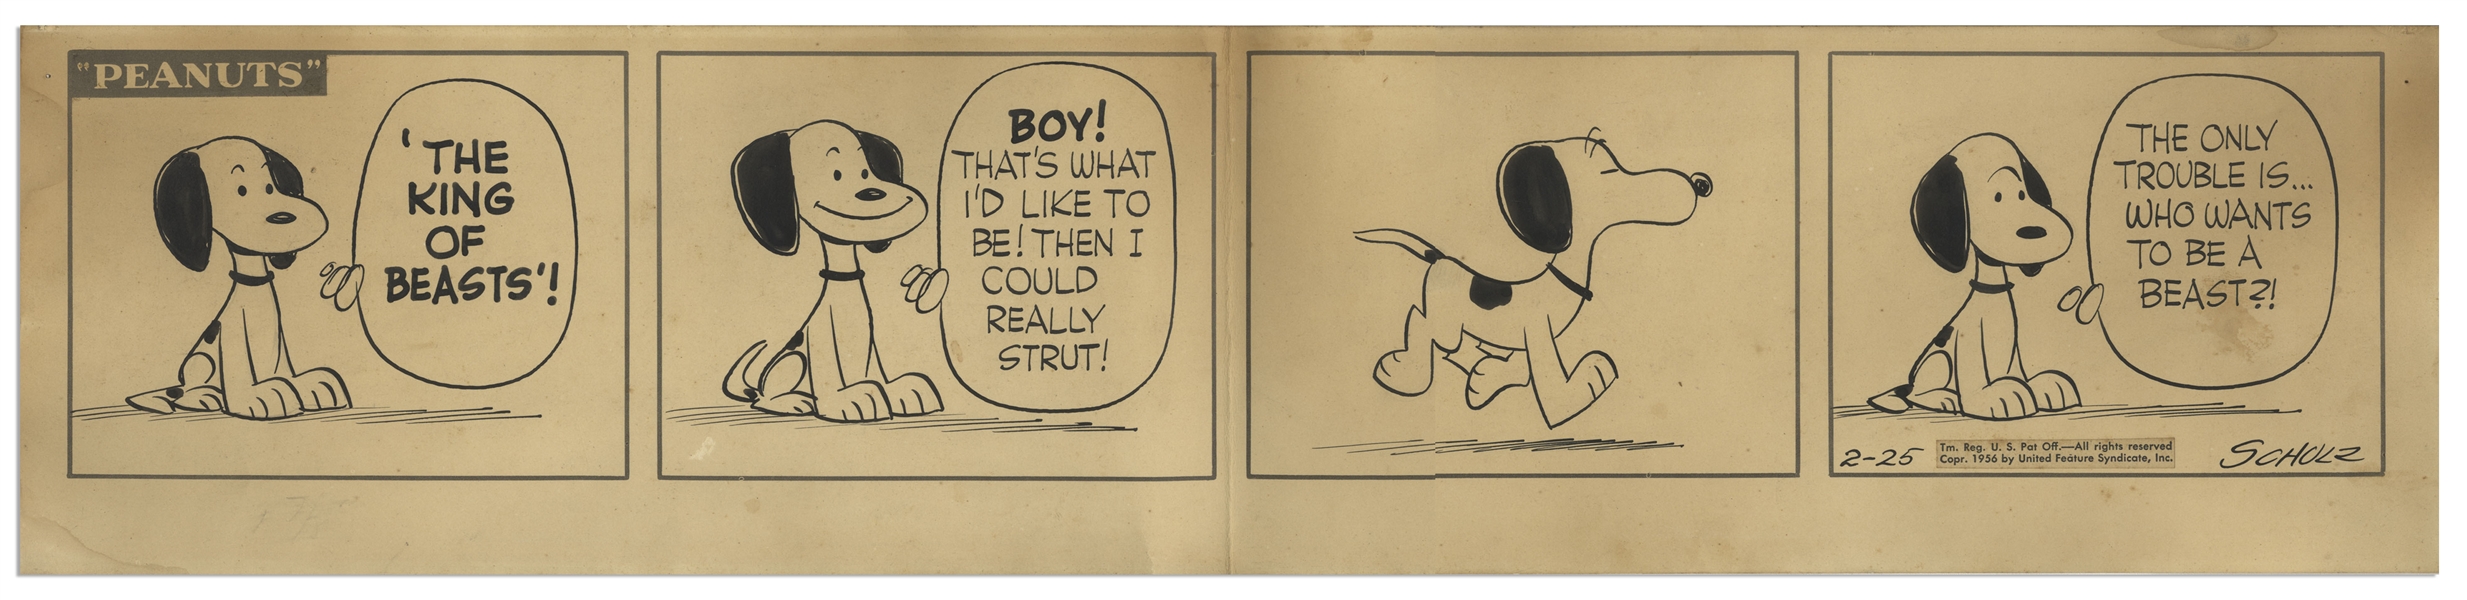 Early Charles Schulz Hand-Drawn ''Peanuts'' Comic Strip From 1956 Showing Snoopy Walking on All Four Legs